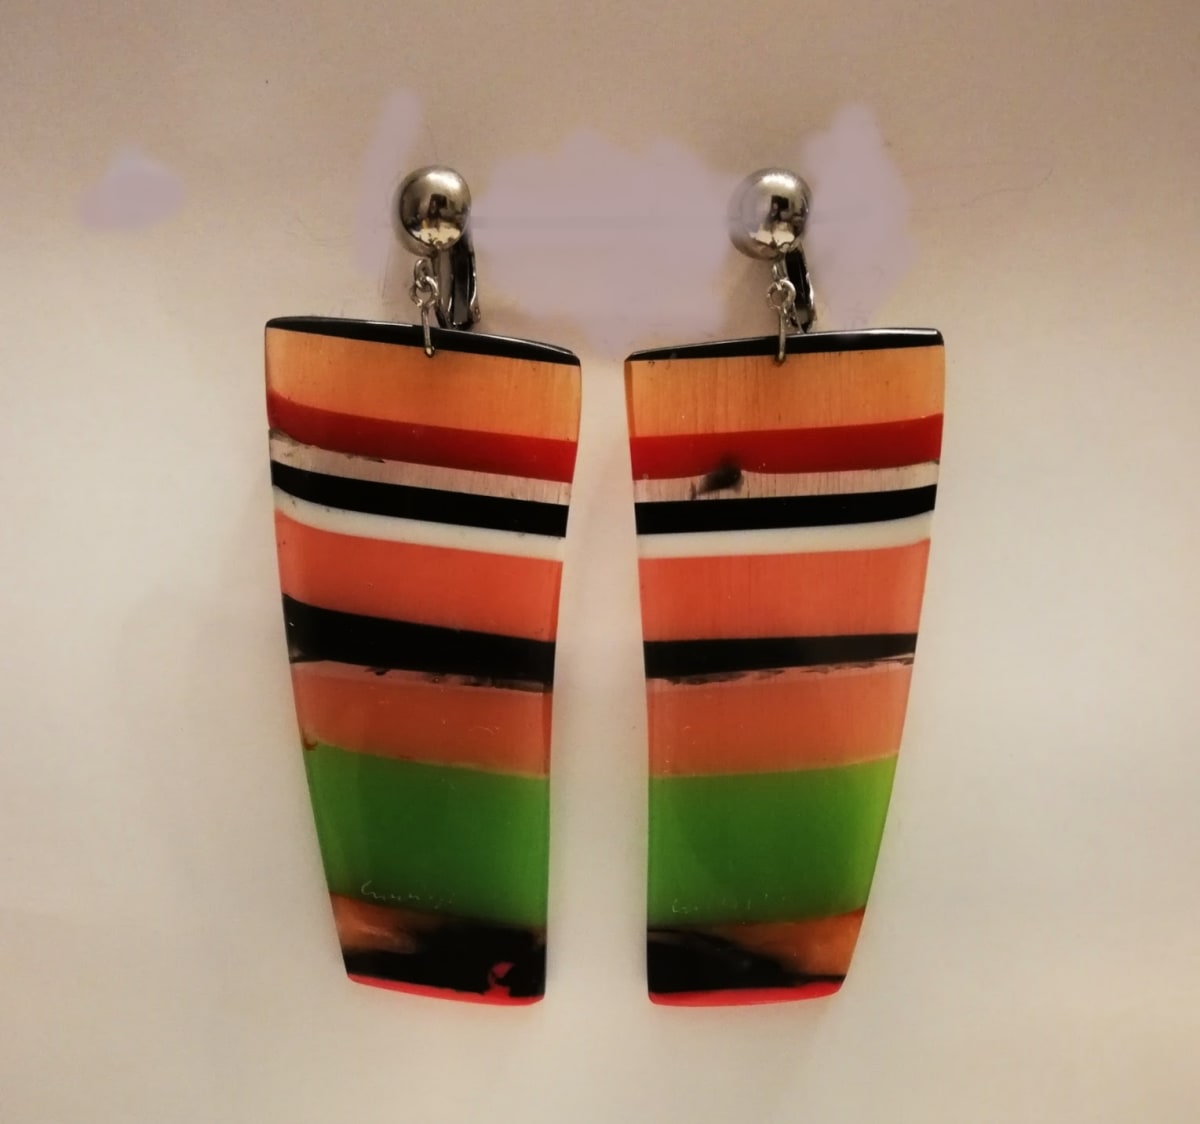 Slice Earrings by cara croninger works  Image: Black, green, orange, watermelon, white, red-striped  with stainless steel clips